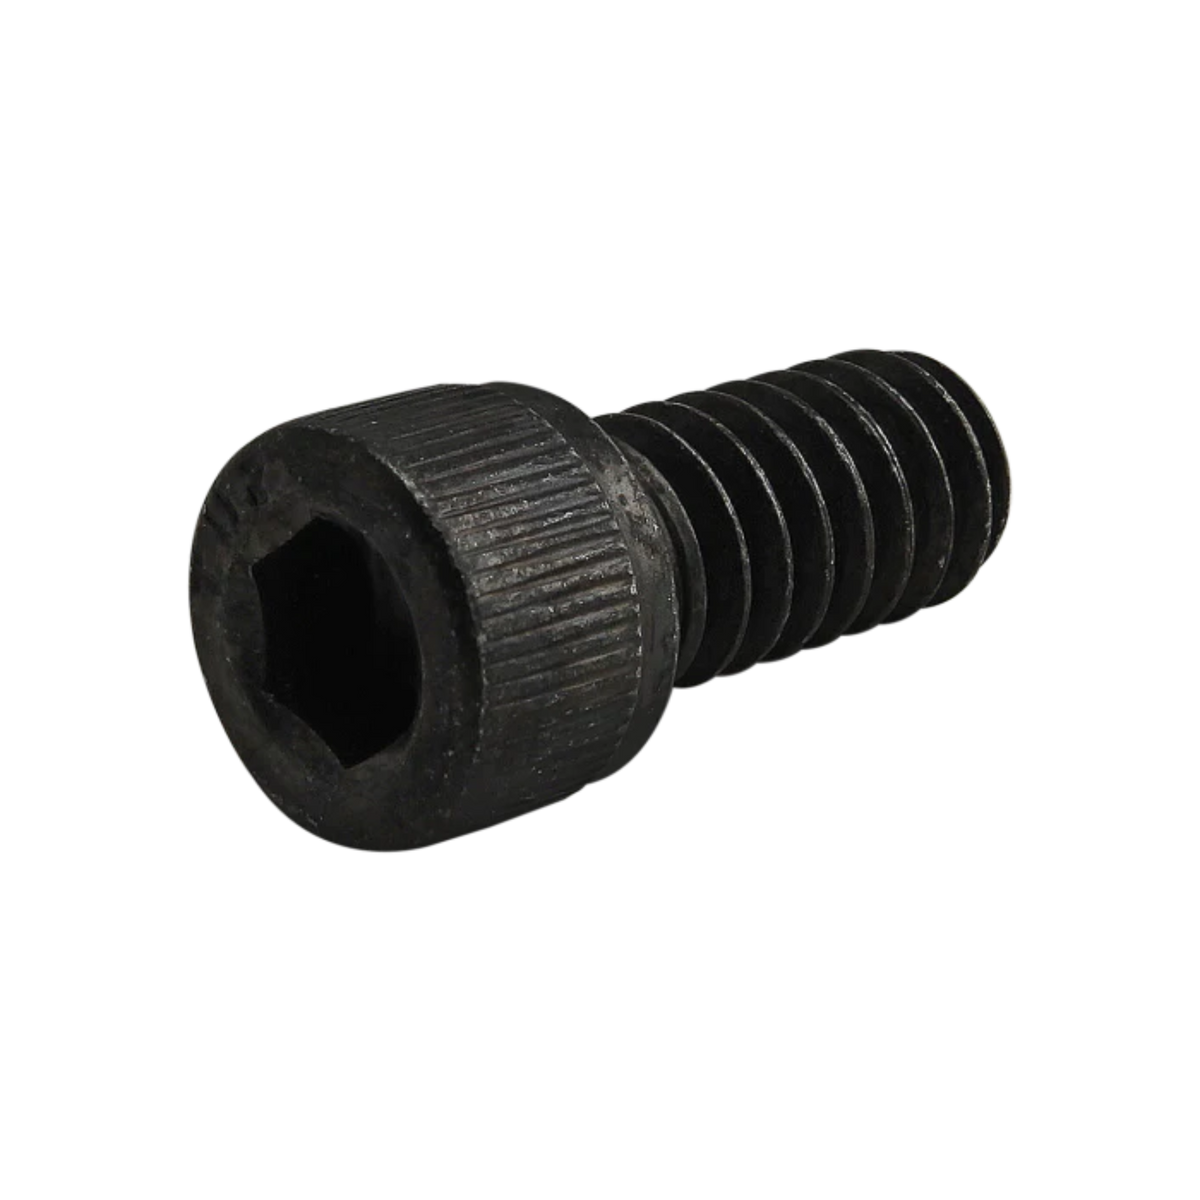 side view of a black socket head cap screw with the head on the left and the threading on the right